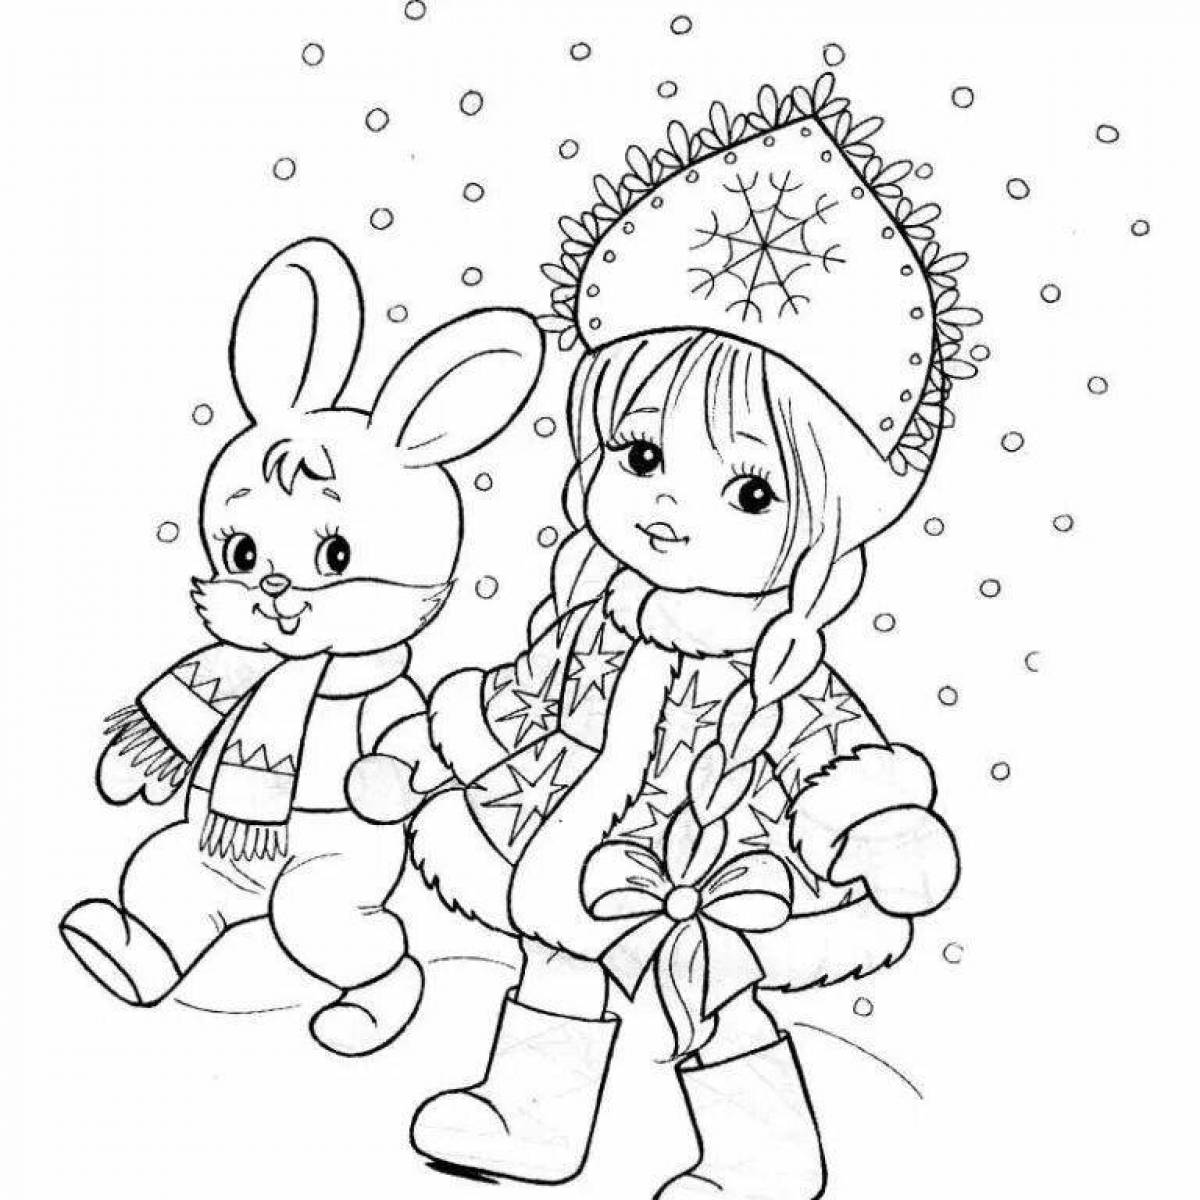 Live coloring year of the rabbit 2023